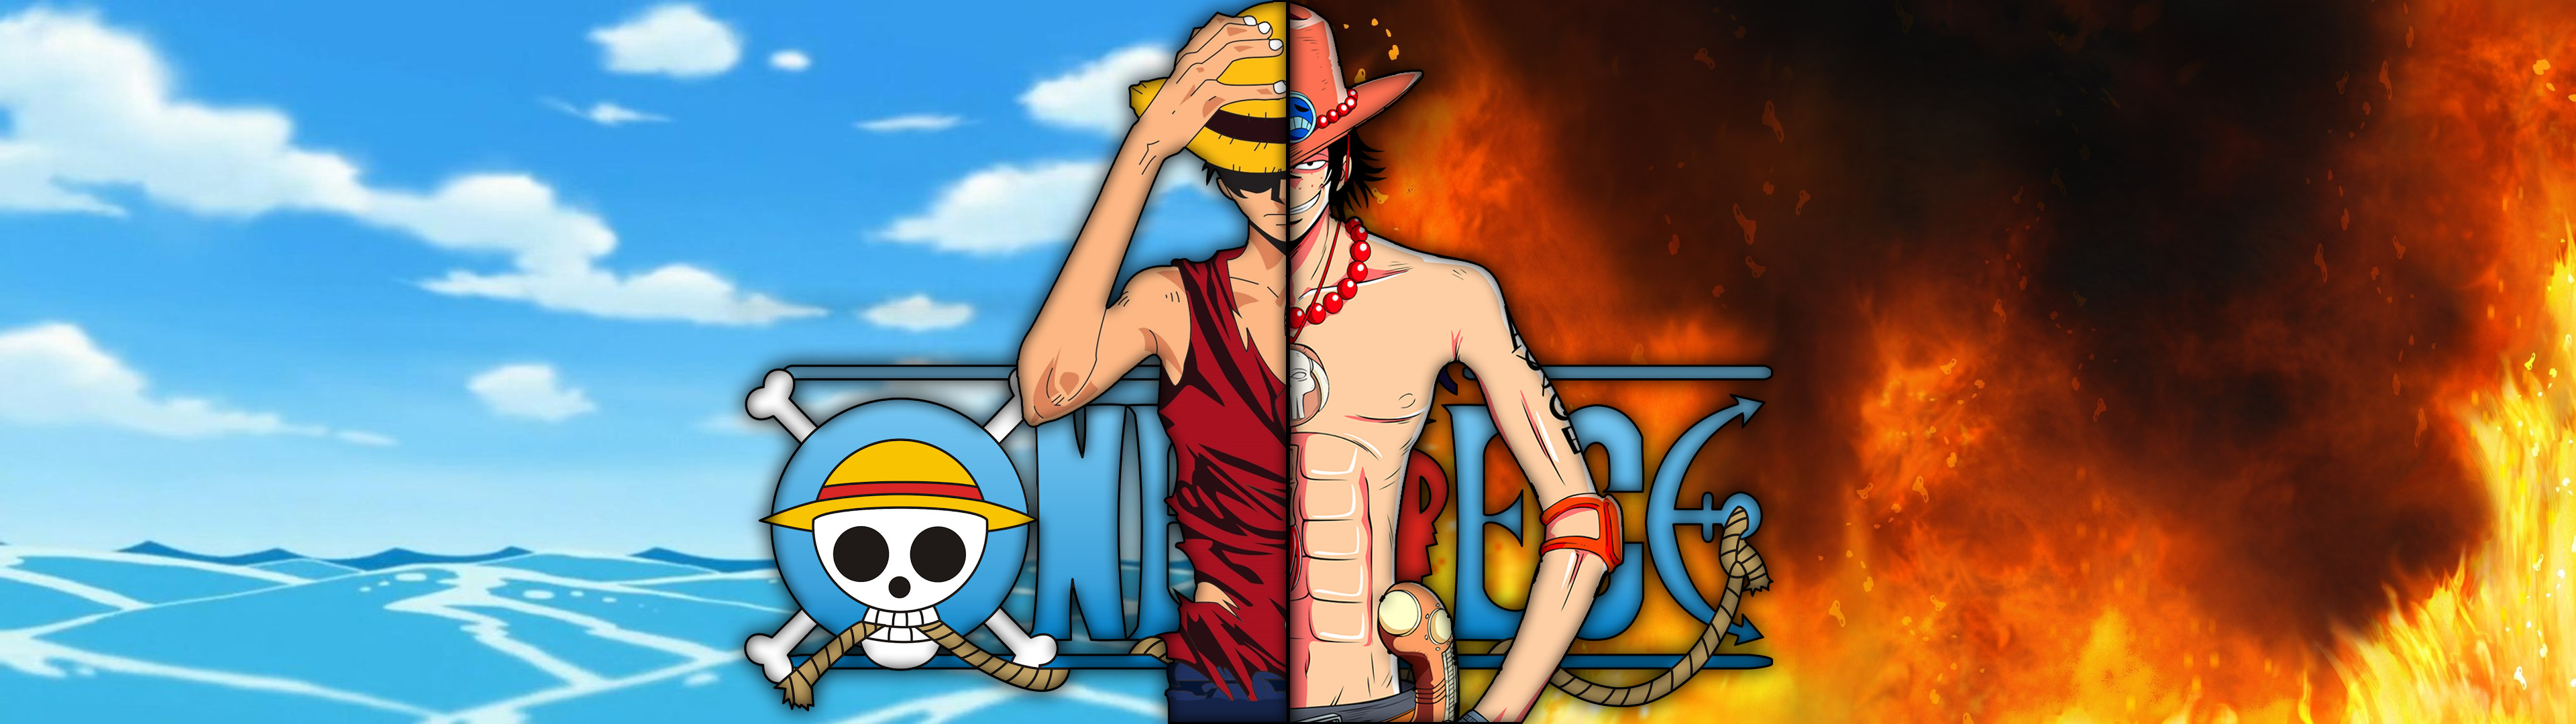 3840x1080 One Piece Luffy And Acedual 3840x1080